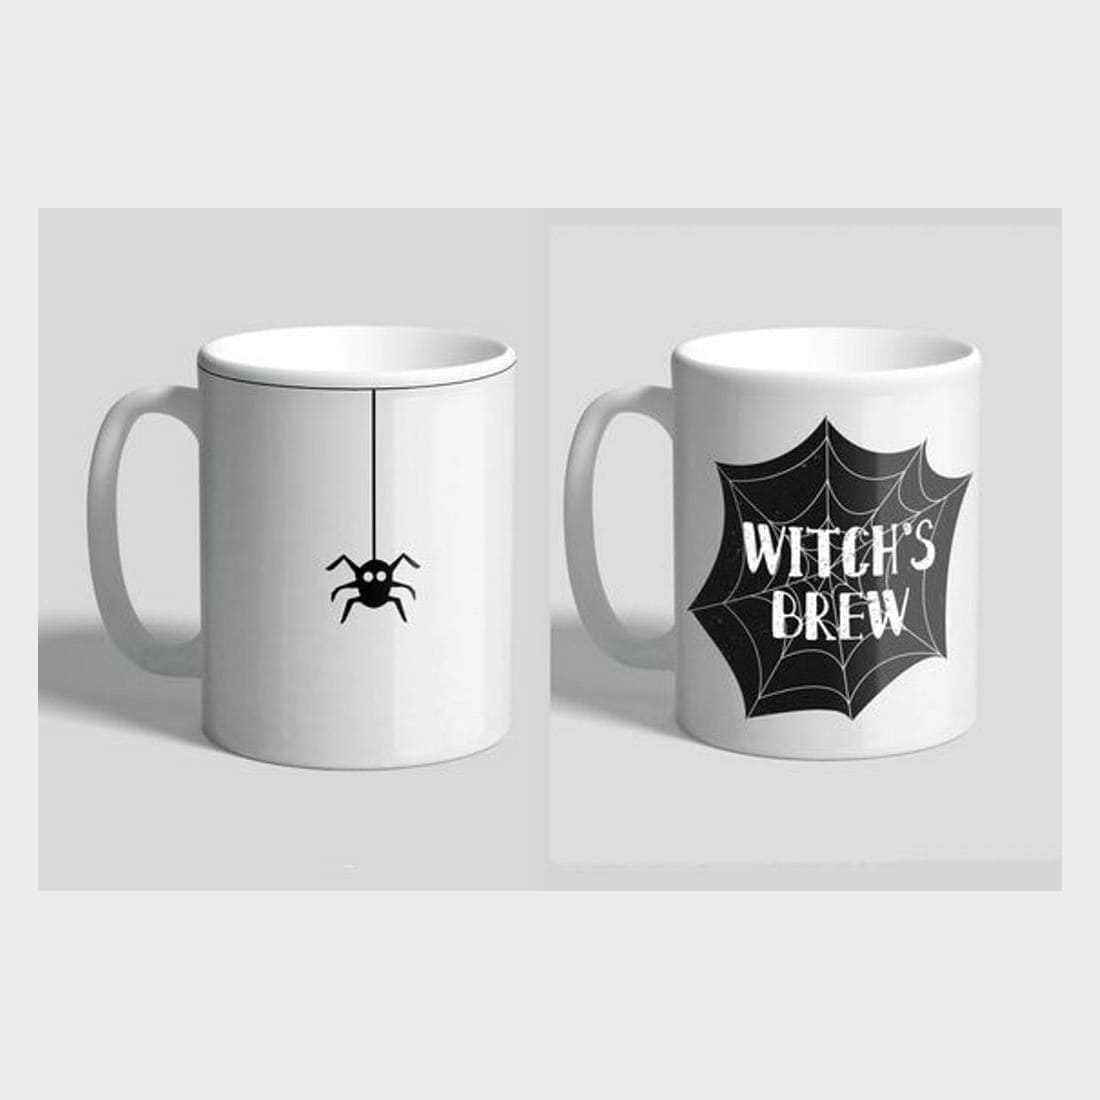 Cup with Spider Web Merch image.